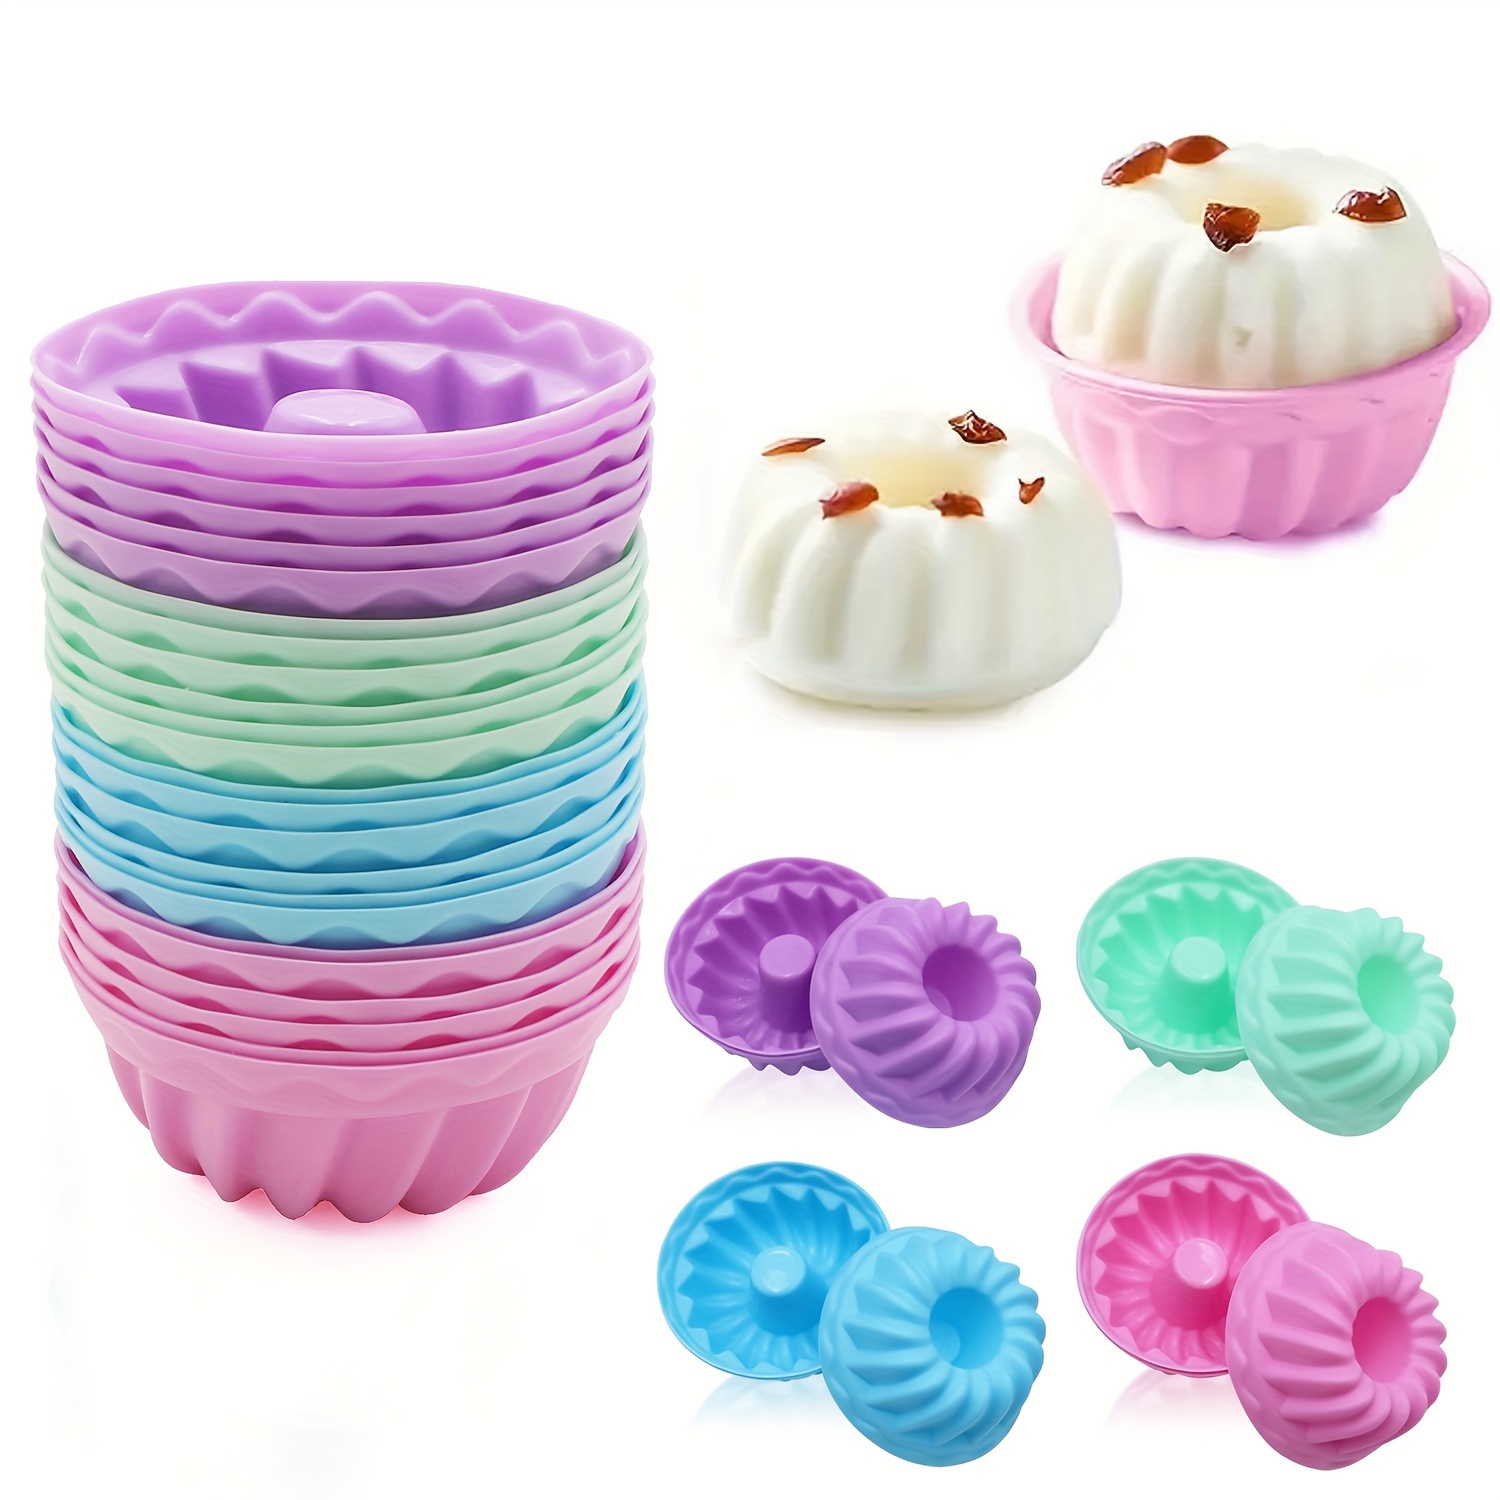 

24pcs Silicone Baking Molds Pumpkin Silicone Cups Non-stick Muffins Mould Washable Cupcake Liners Donut Cake Pan Reusable Cupcake Wrapper Molds For Pan Oven Microwave Dishwasher